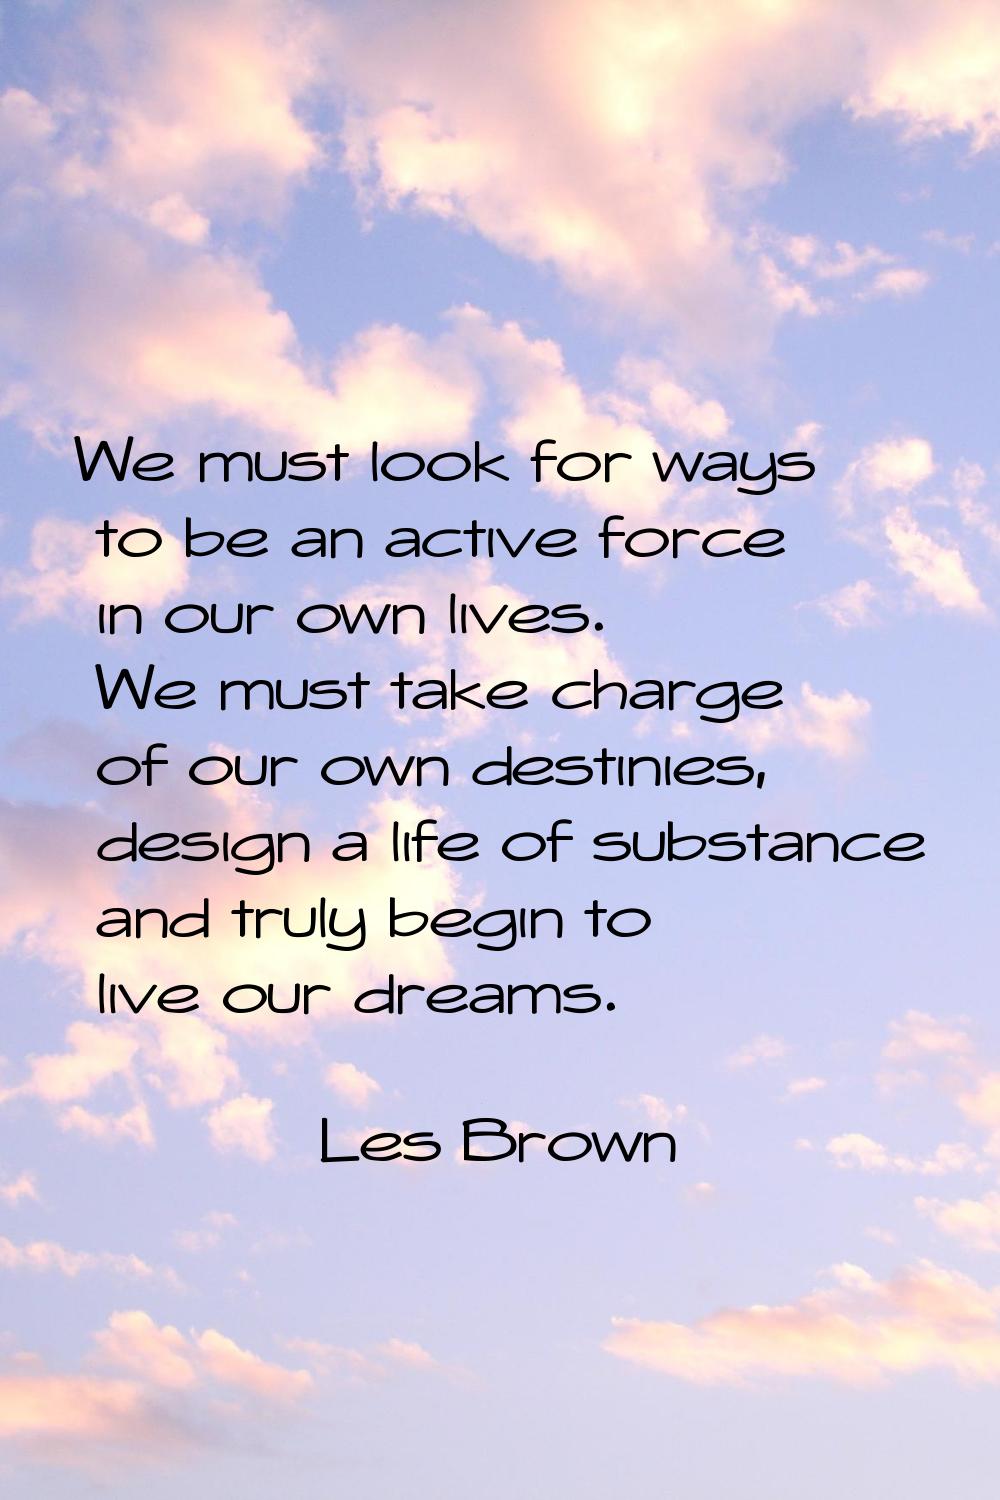 We must look for ways to be an active force in our own lives. We must take charge of our own destin